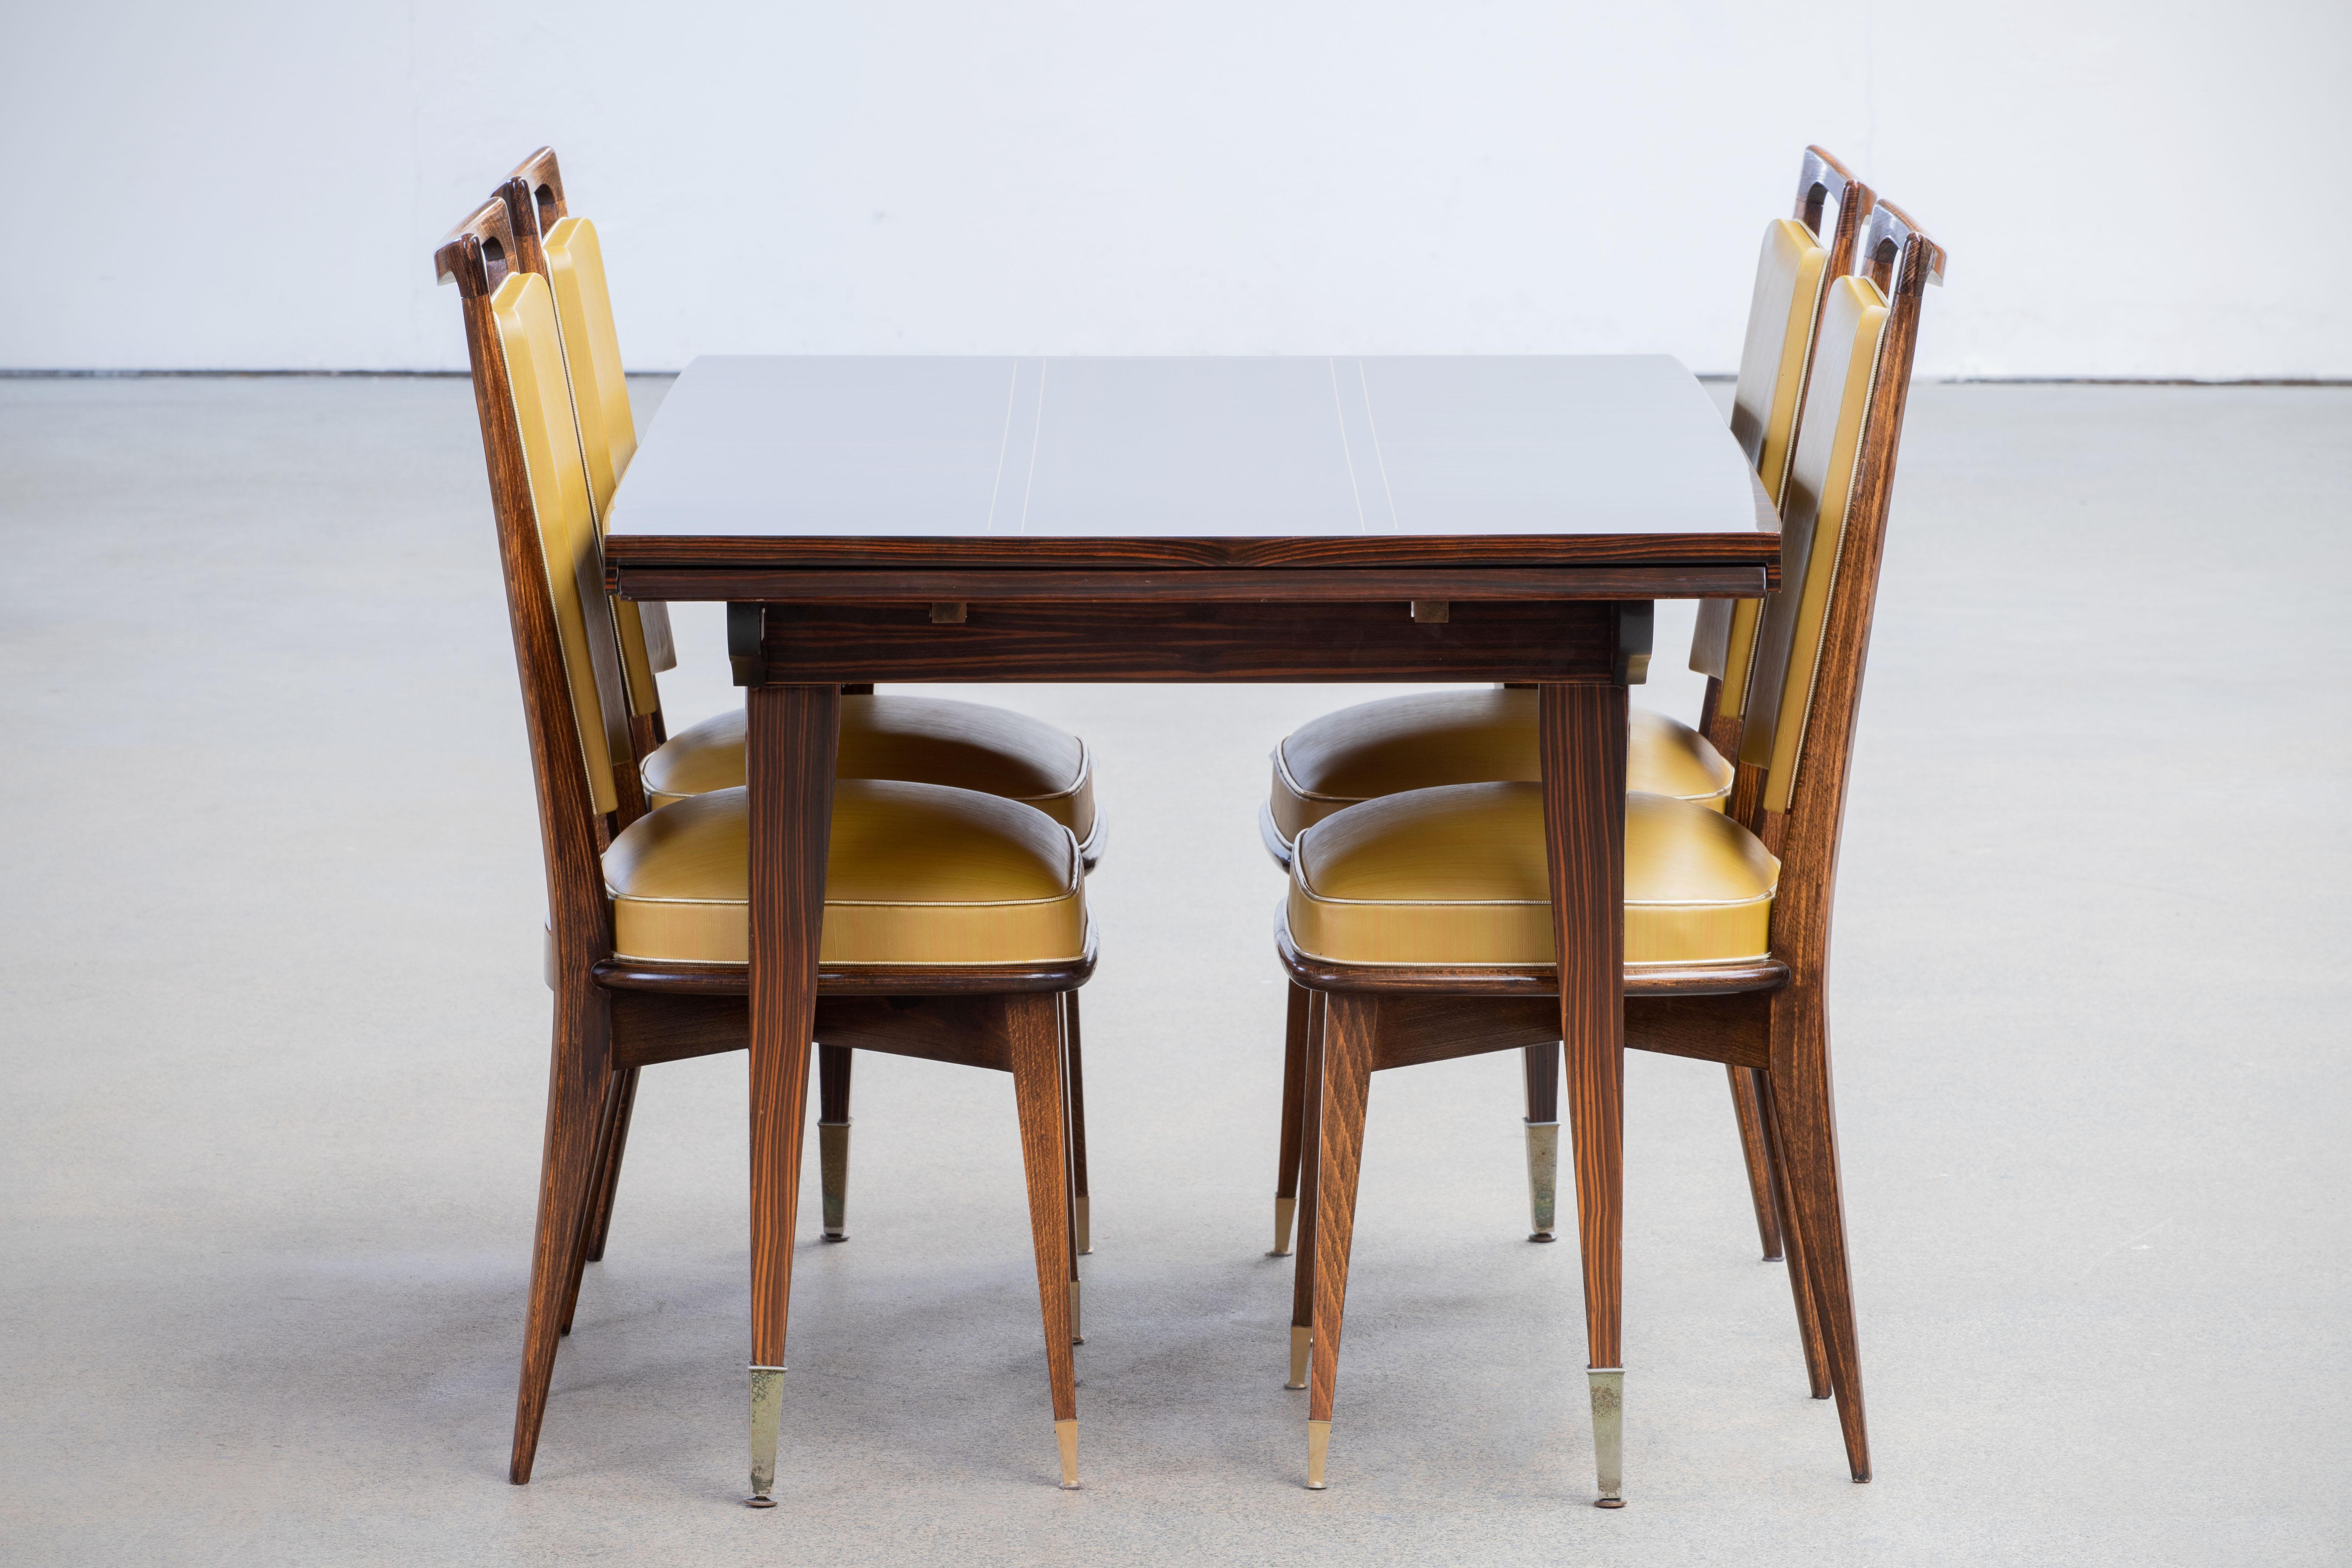 French Art Deco Brutalist Table, Macassar, 1940s For Sale 3